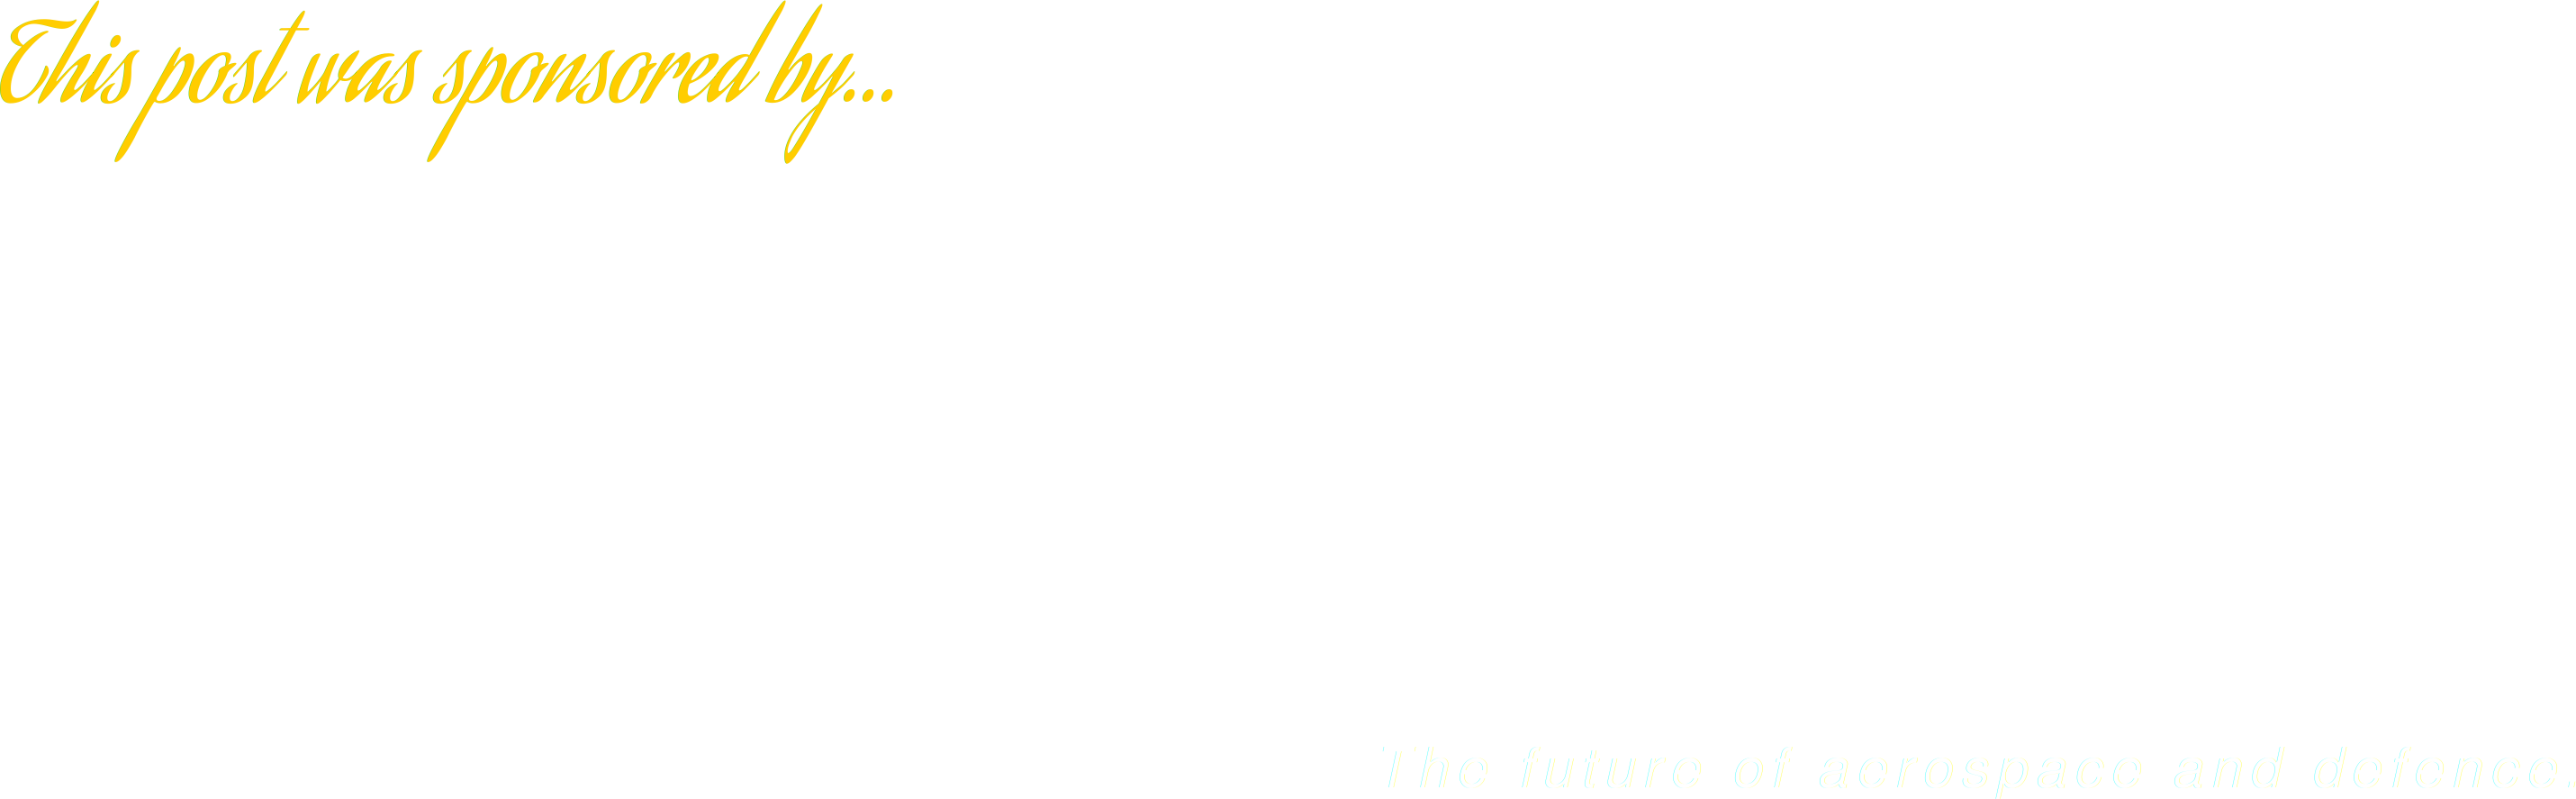 This post is sponsored by Wraitheon Technologies.